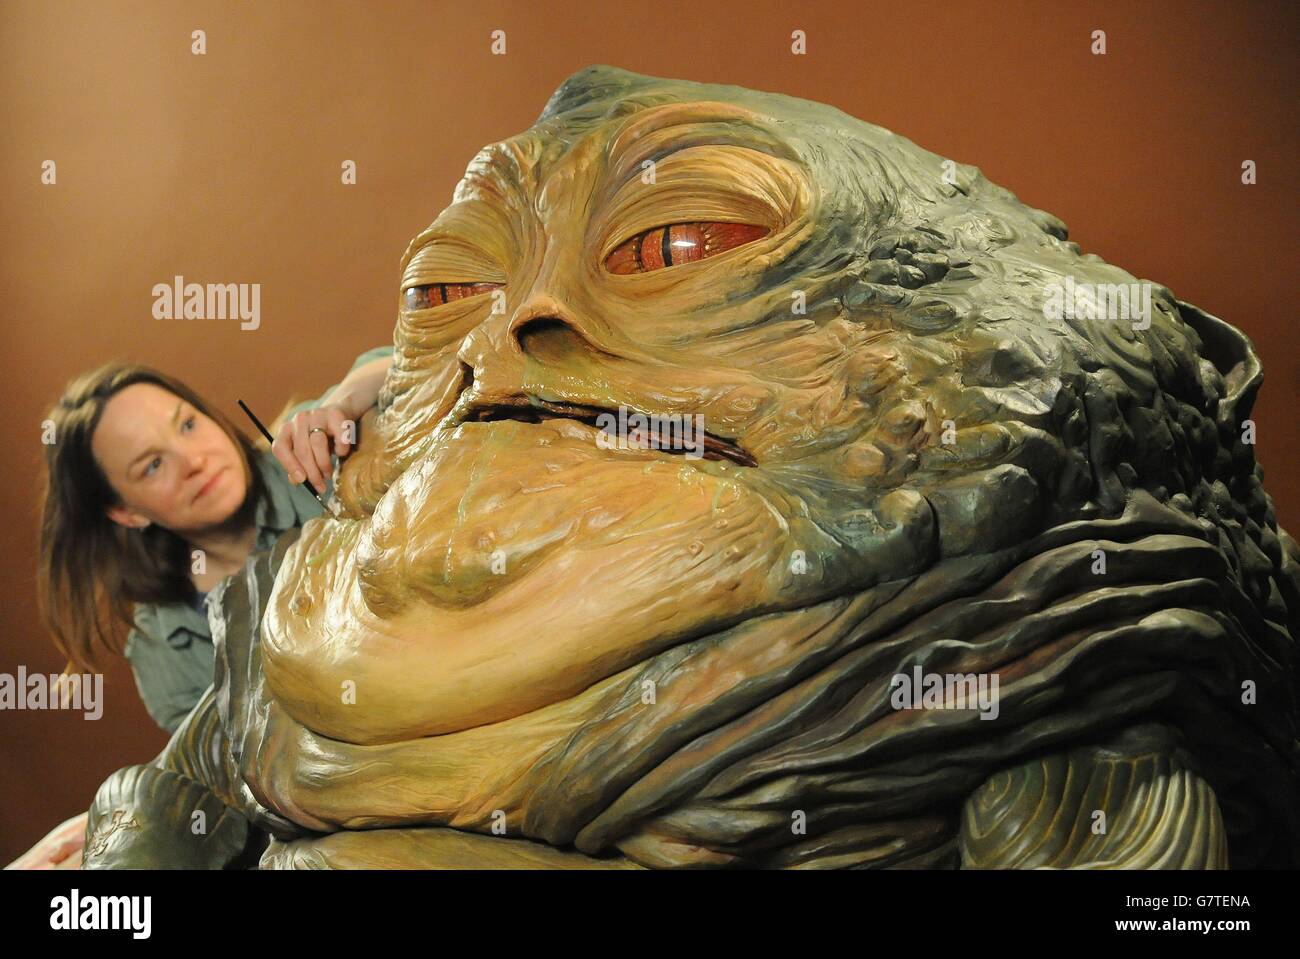 Amanda Tremewen applies the finishing touches to a wax figure of Jabba the Hutt which along with Princess Leia, is part of Madame Tussauds' new Star Wars Experience attraction which opens to the public on Saturday May 16. Stock Photo